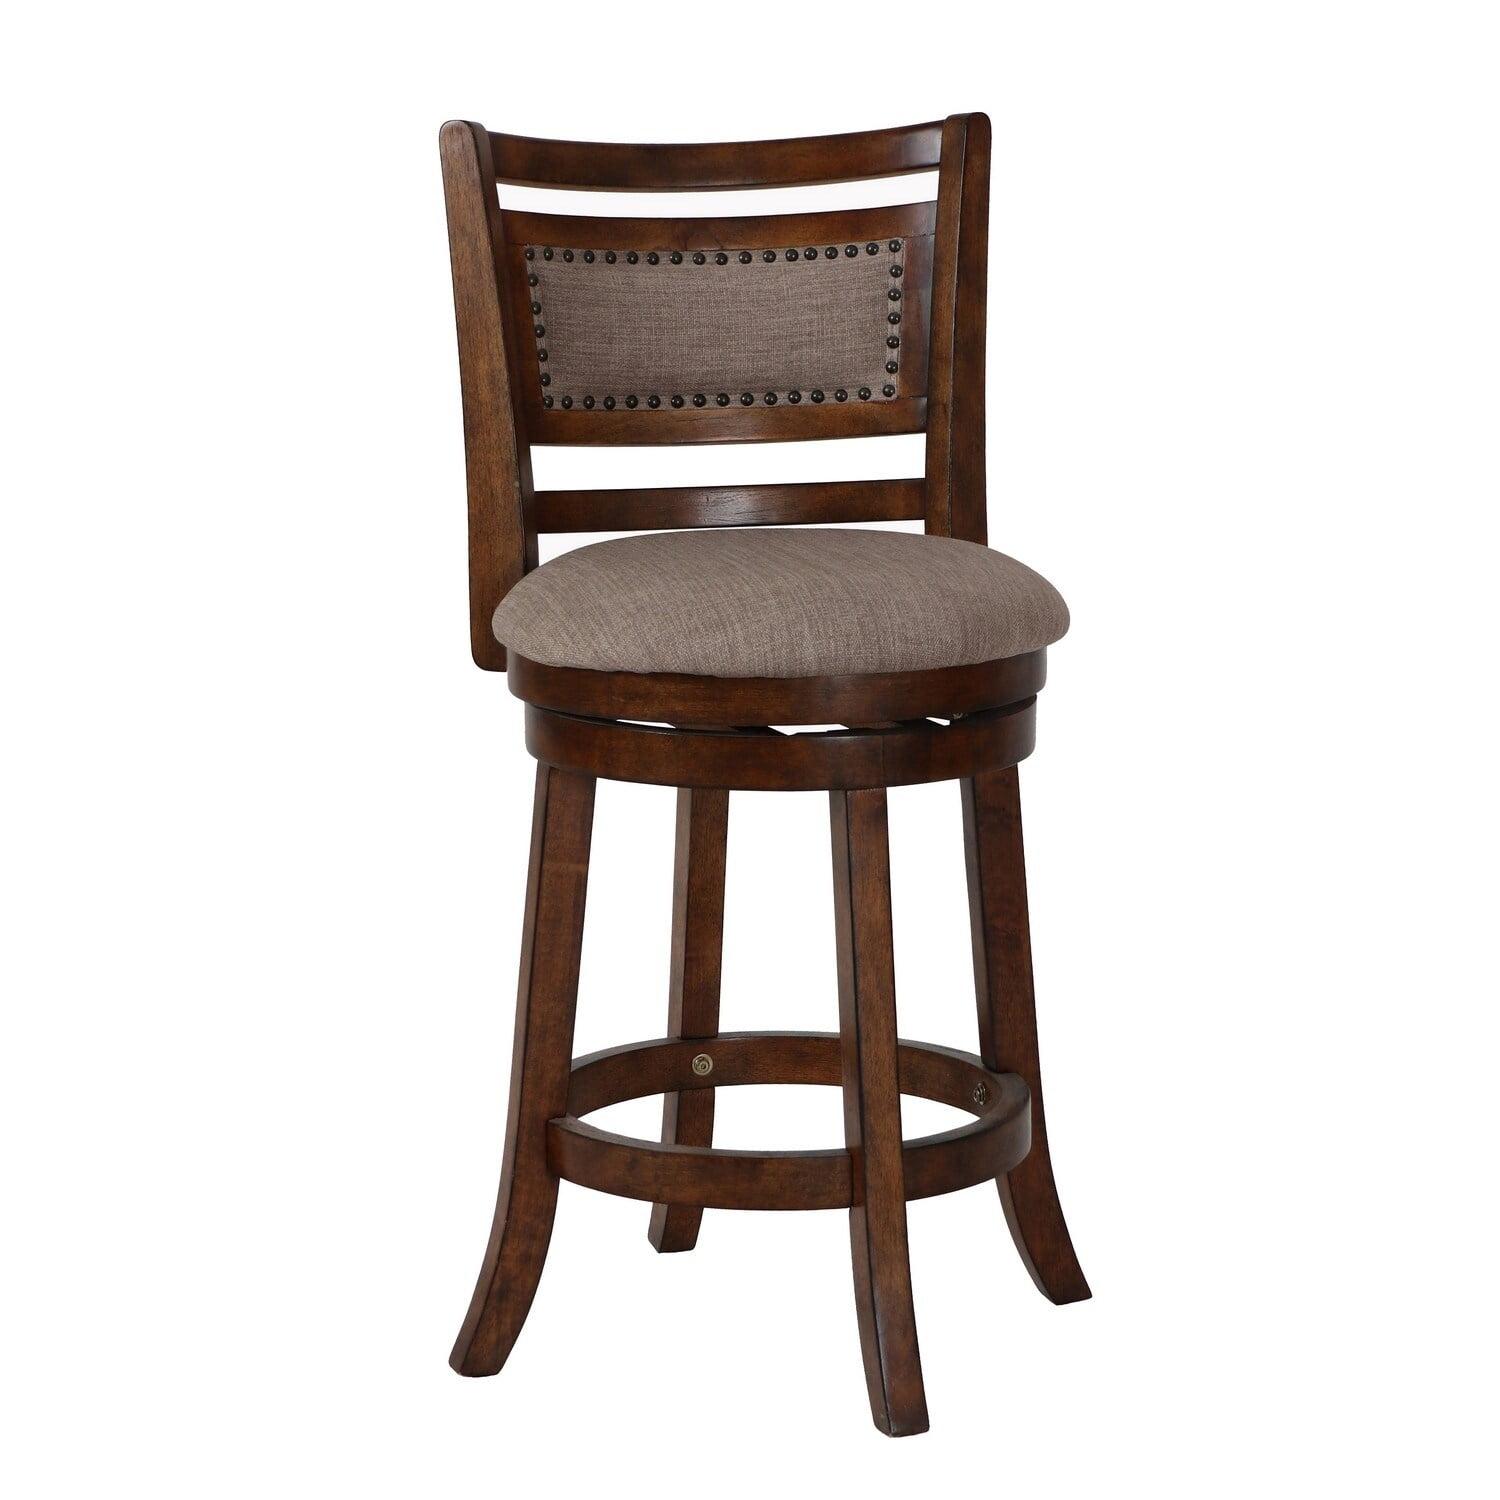 Curved Swivel Solid Wood Counter Stool with Beige Fabric Cushion